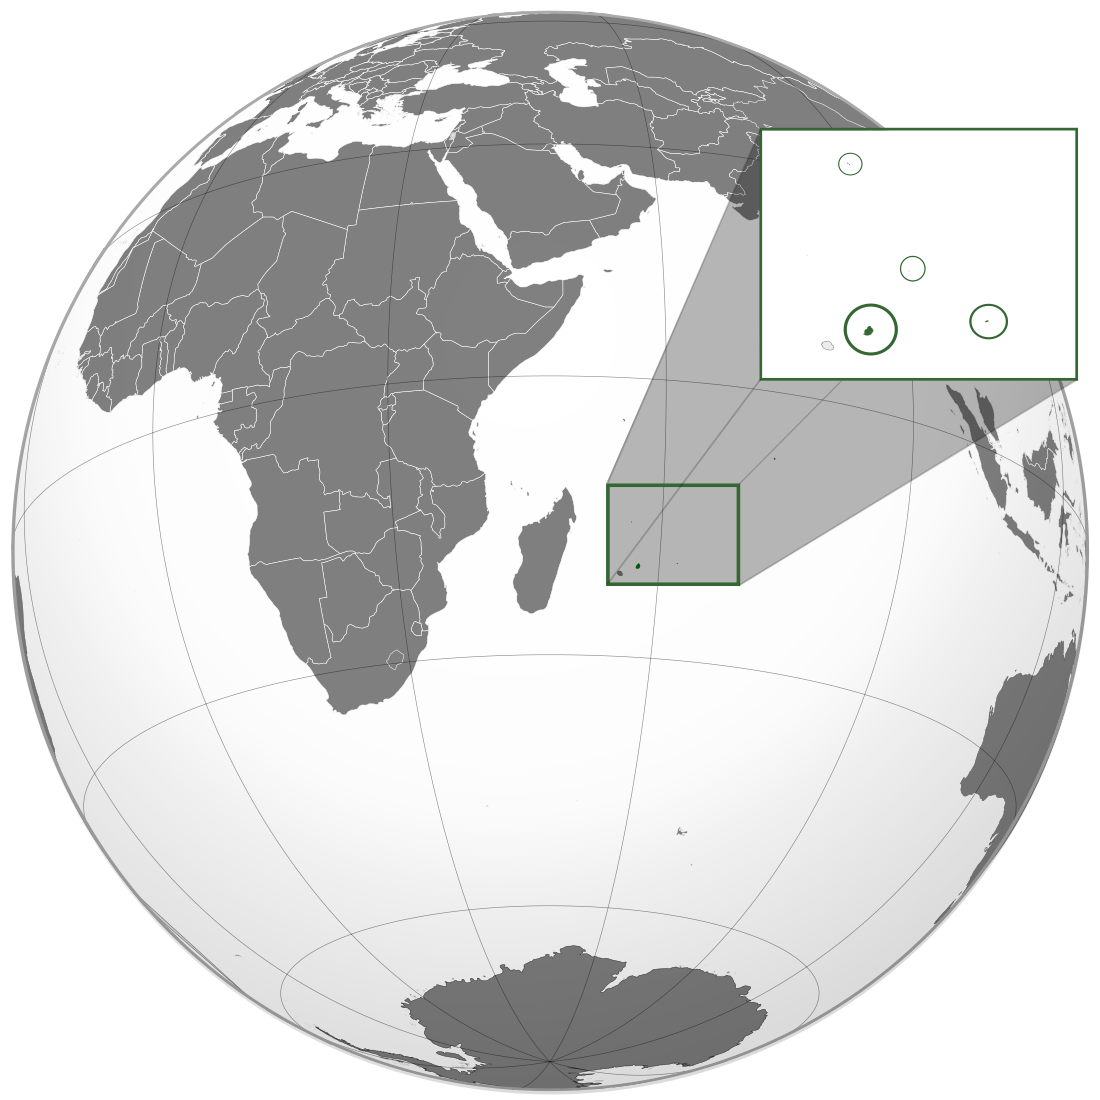 1100px-Mauritius_%28orthographic_projection_with_inset%29.svg.png